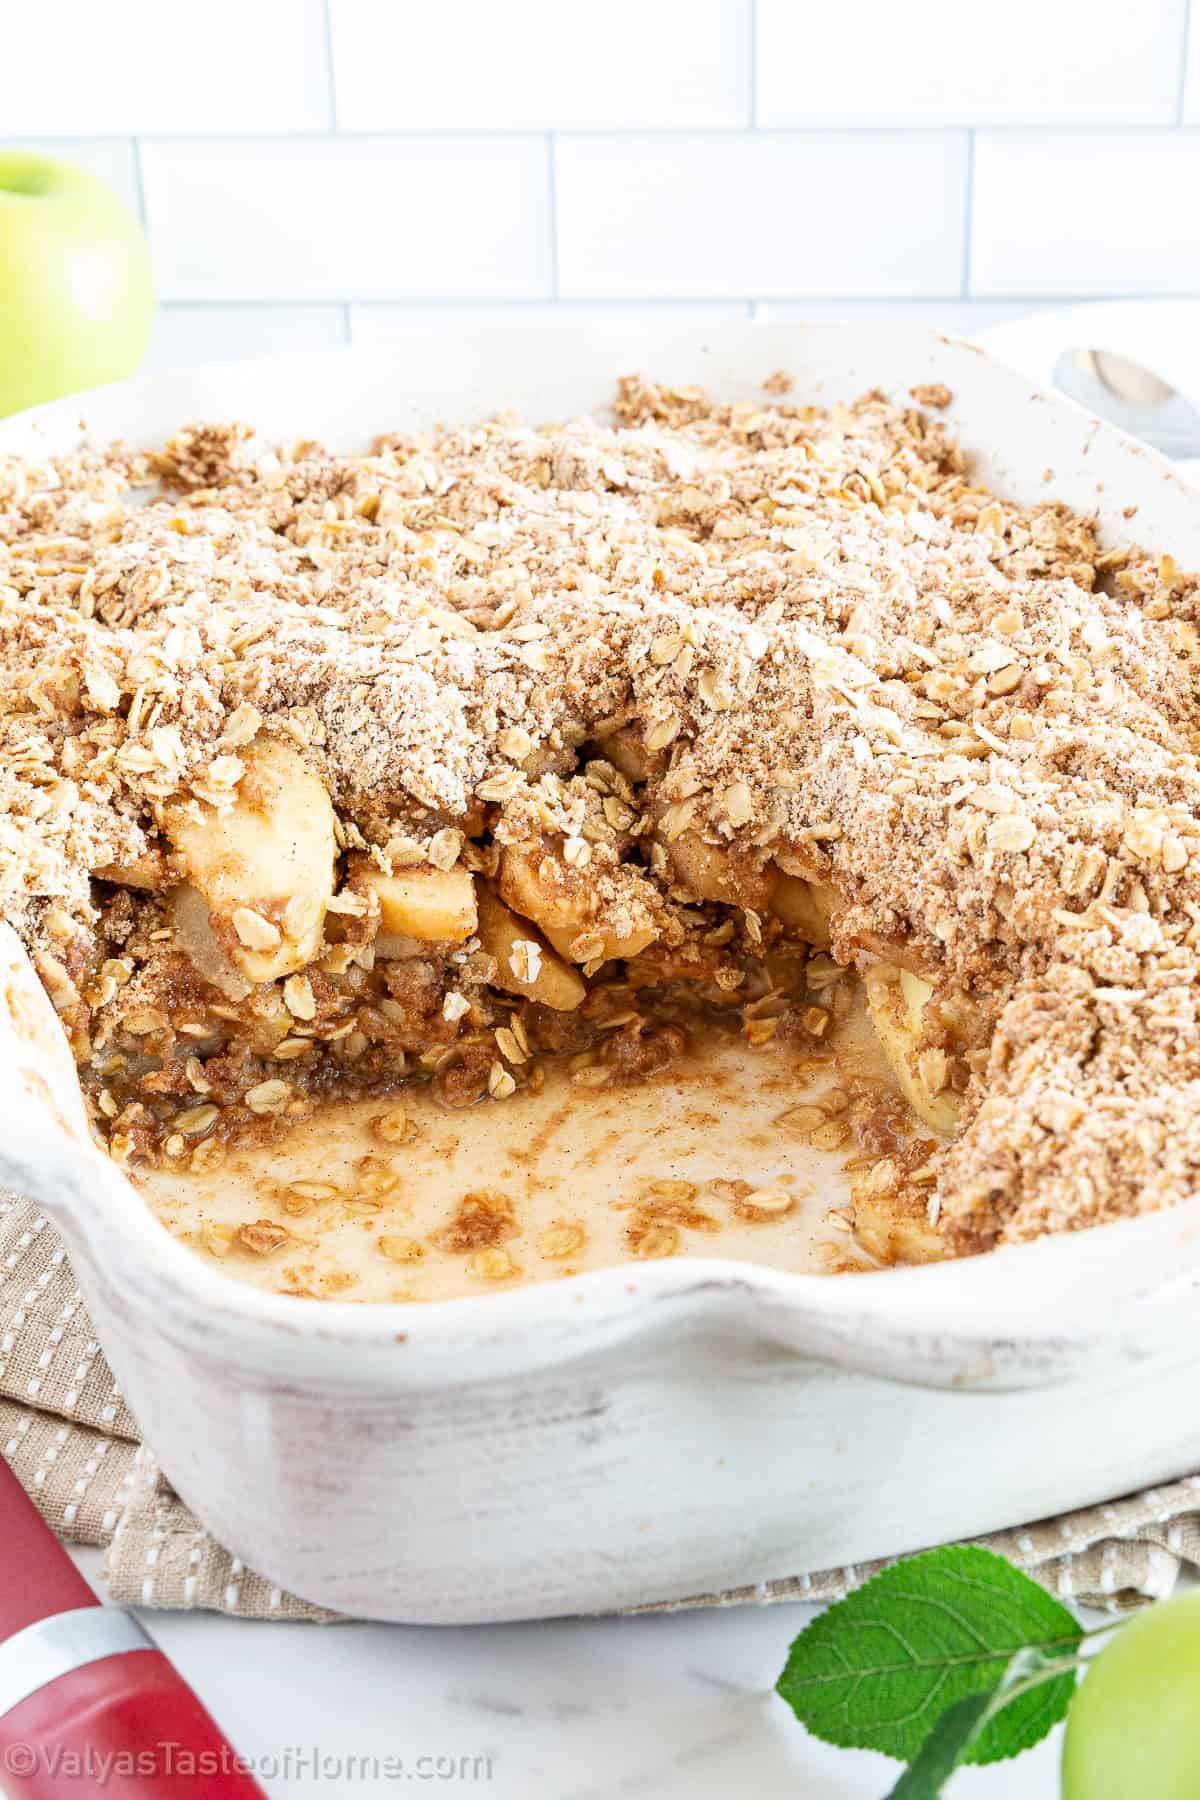 This delicious traditional and classic dessert that is made with a streusel topping and has an apple filling. It's different 